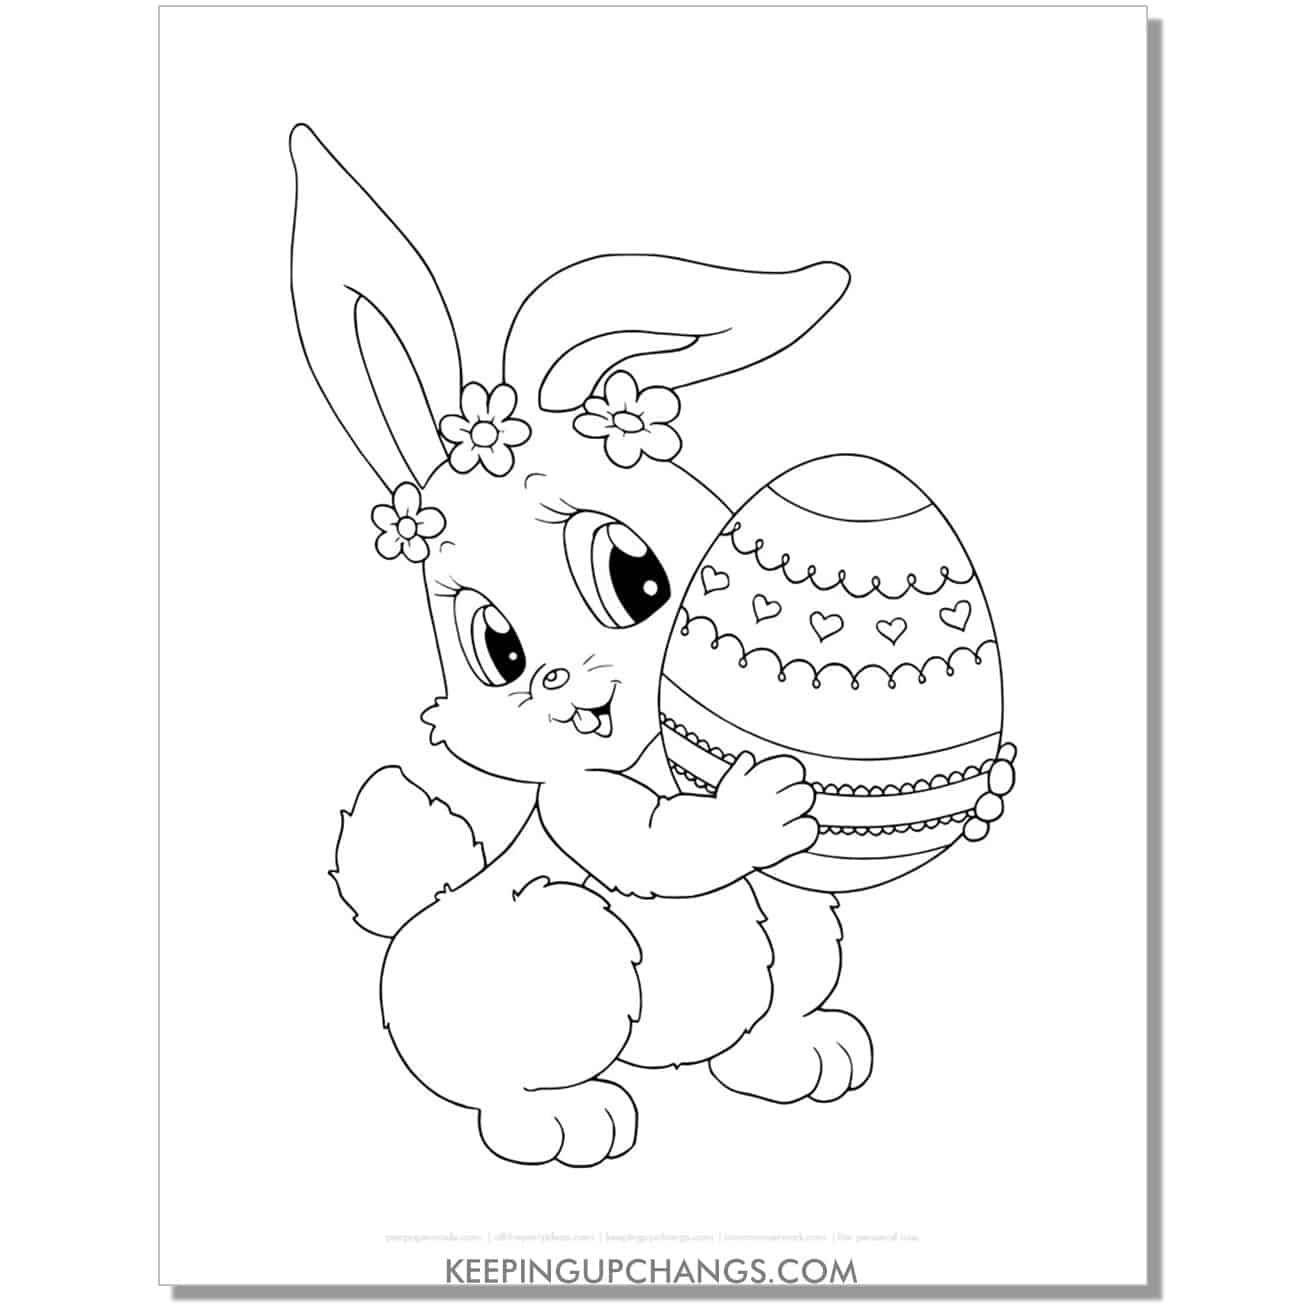 cute girl easter bunny holding egg coloring page, sheet.